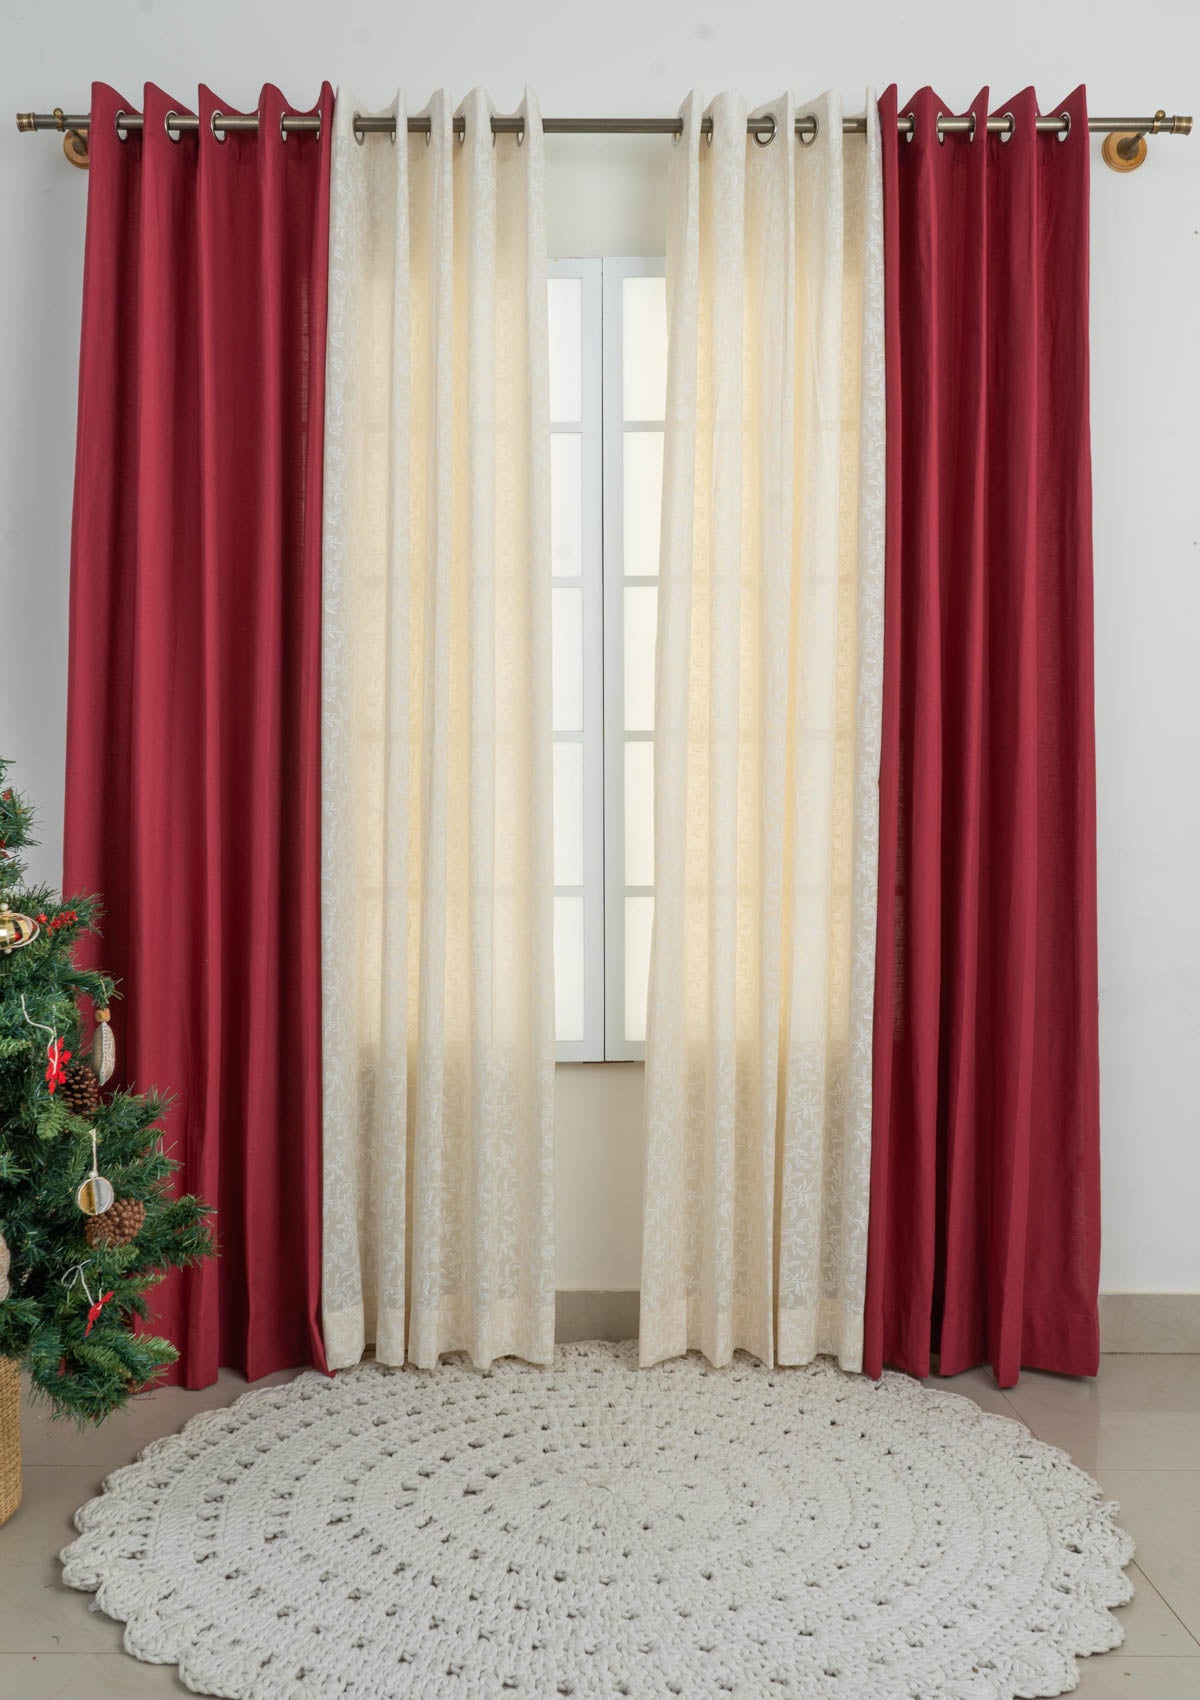 Wine Red with Trailing berries set of 4 Combo curtain - Multicolor